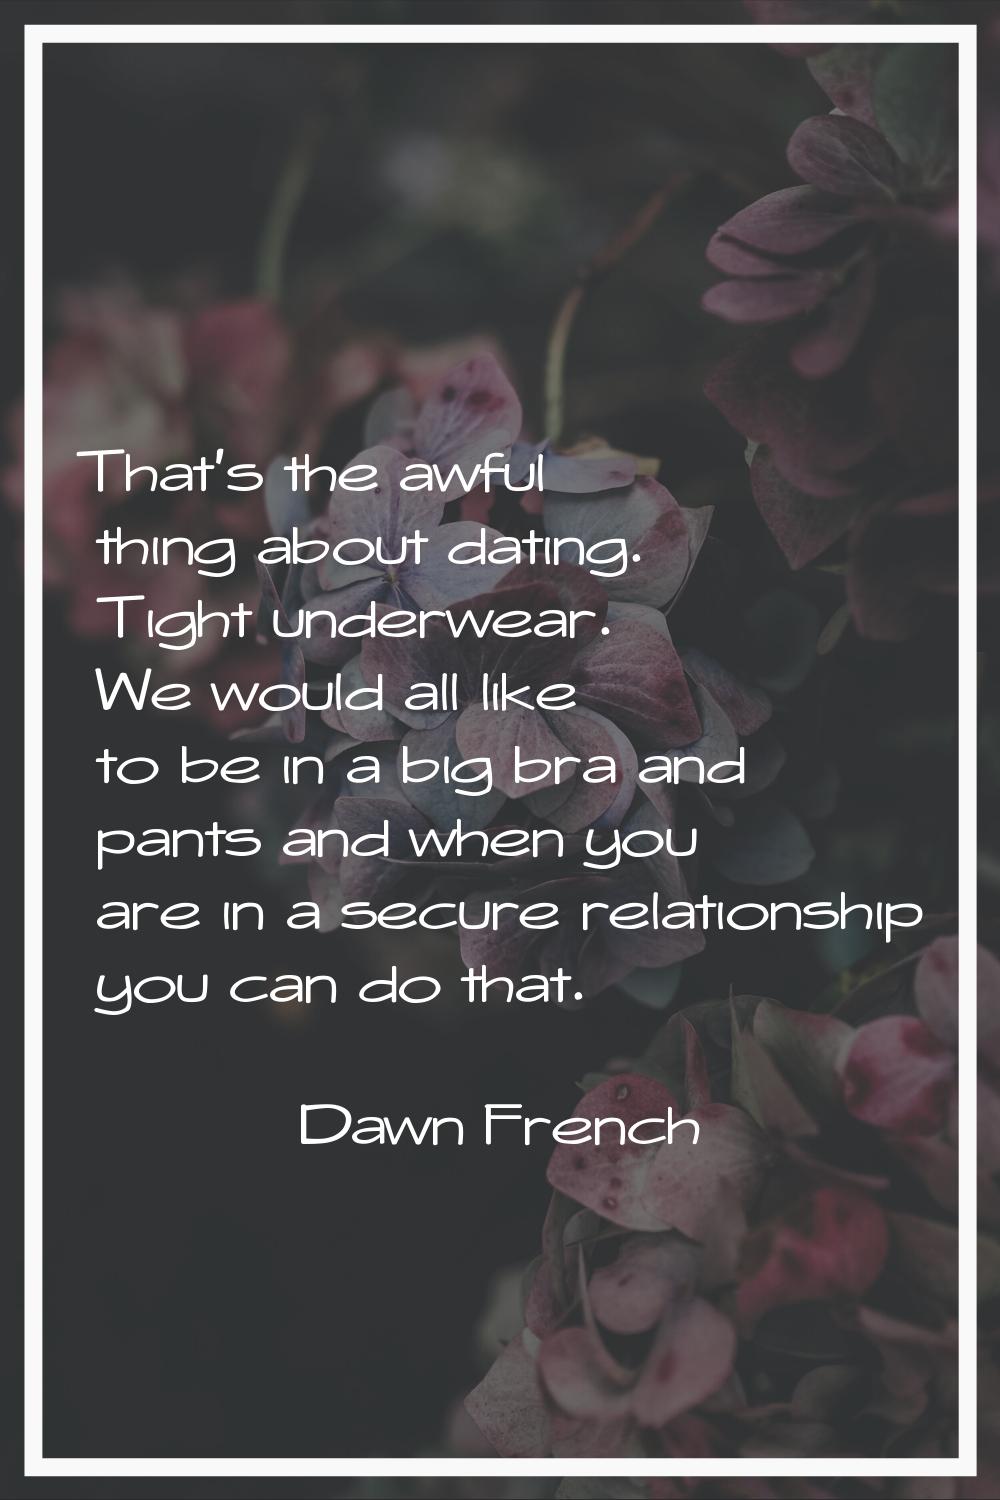 That's the awful thing about dating. Tight underwear. We would all like to be in a big bra and pant